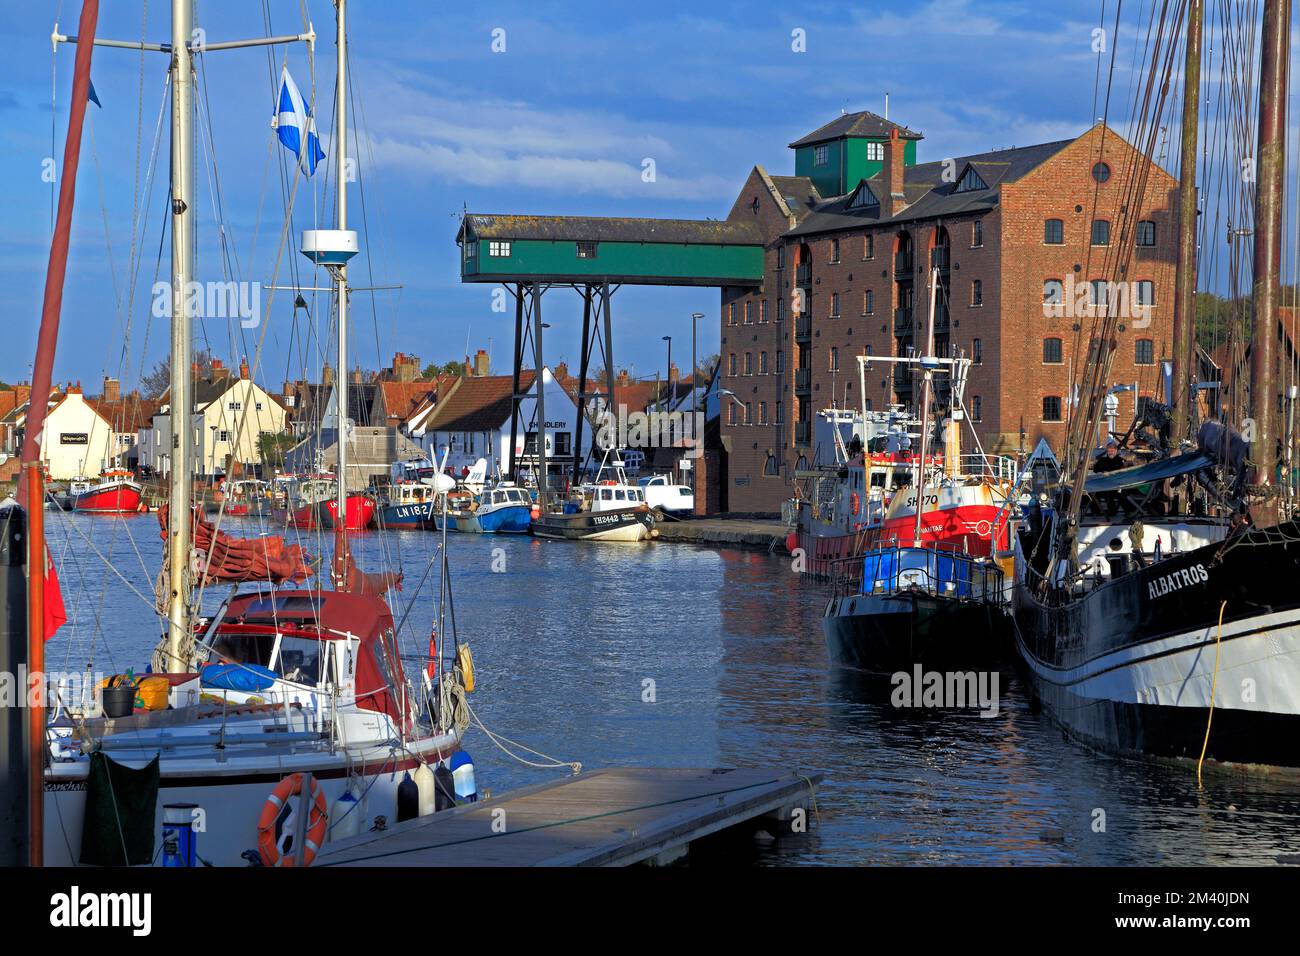 Wells next the Sea, Harbour, Boats, Town, Norfolk, England, UK Stock Photo